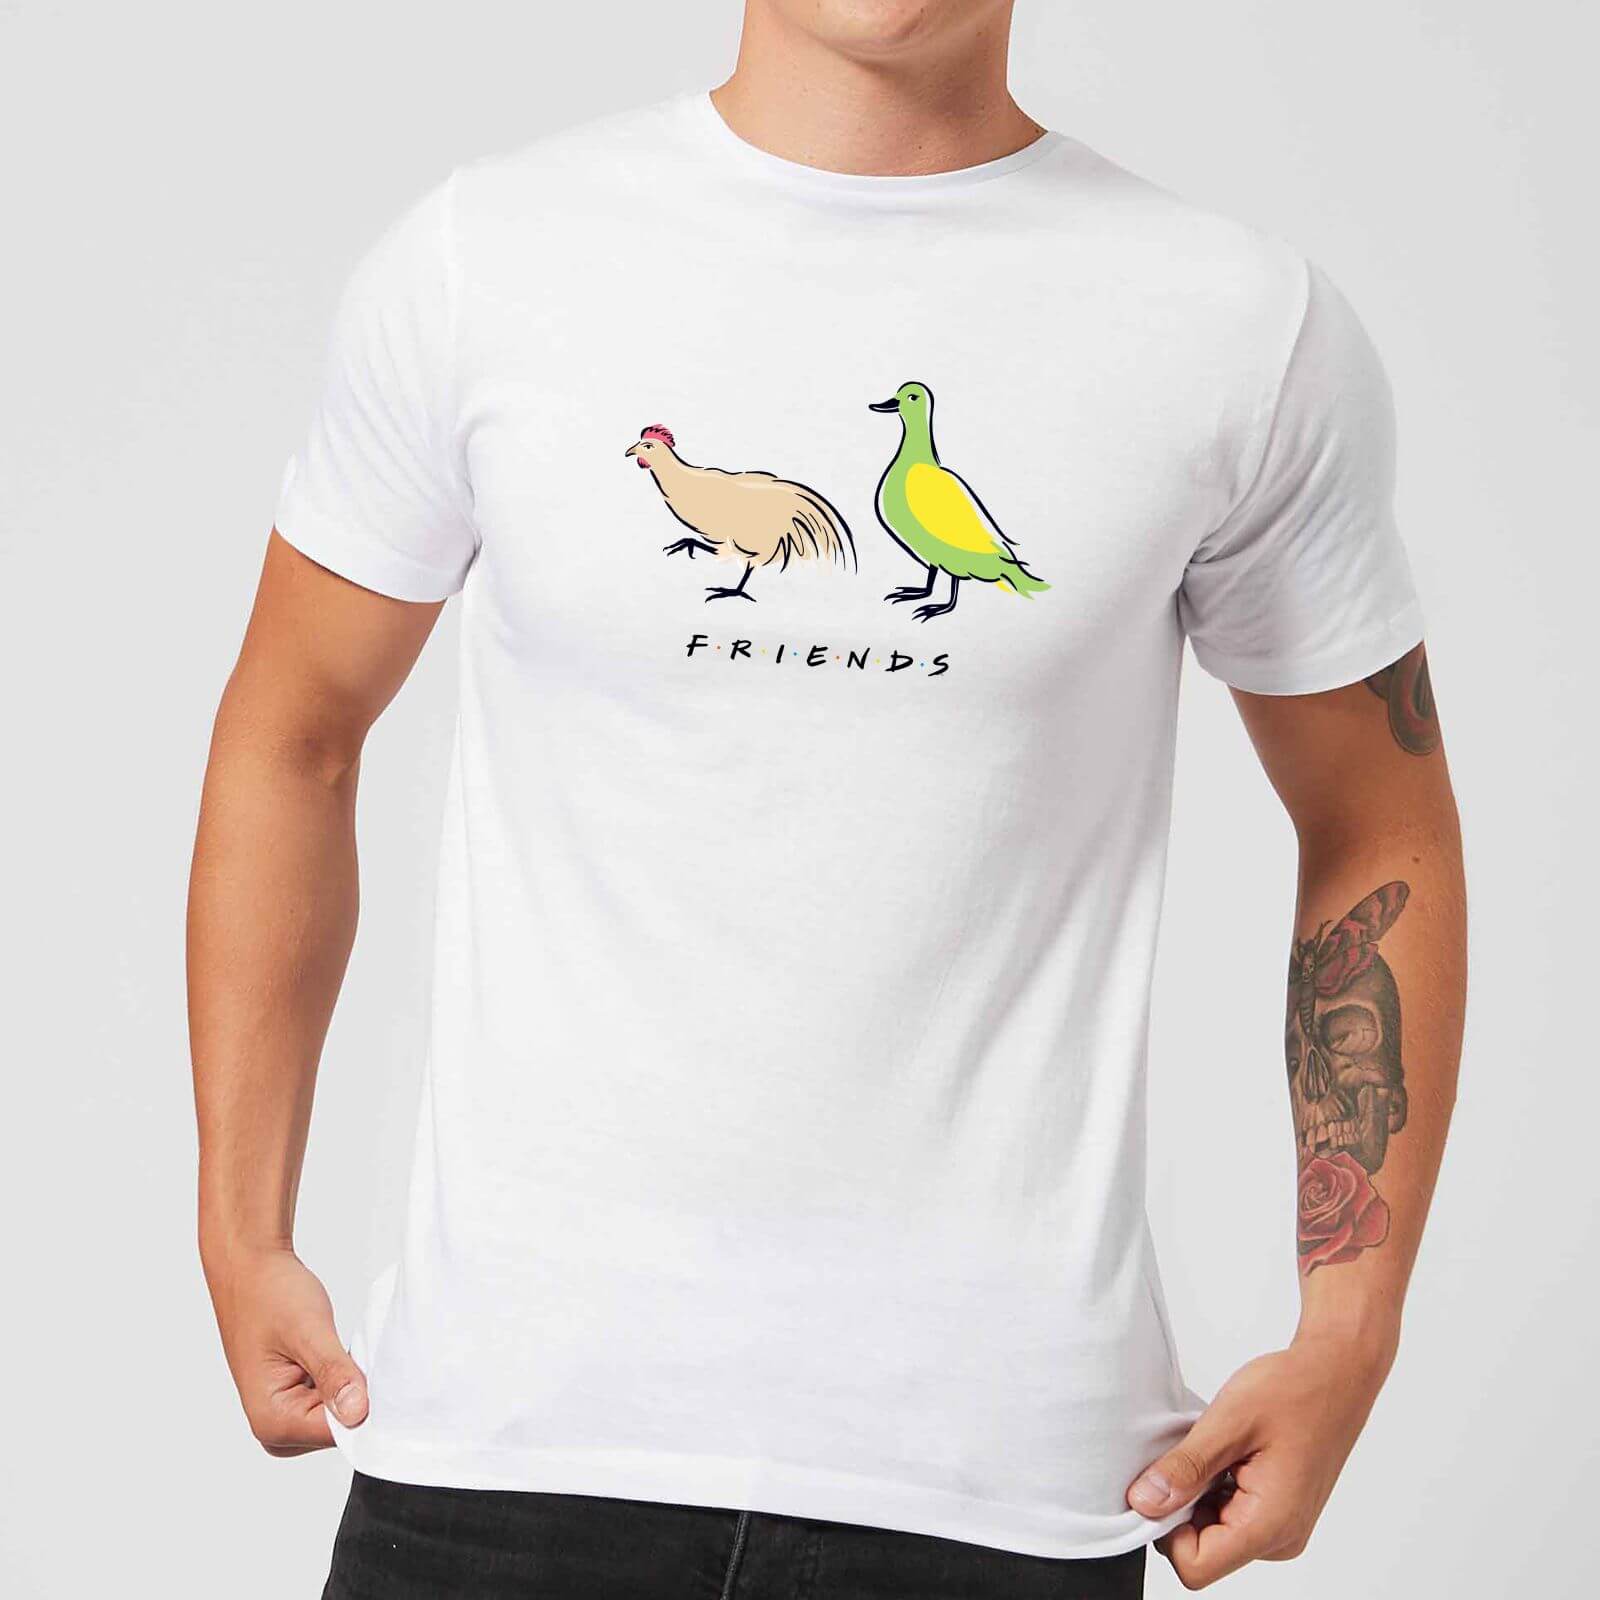 Friends The Chick And The Duck Men's T-Shirt - White - S